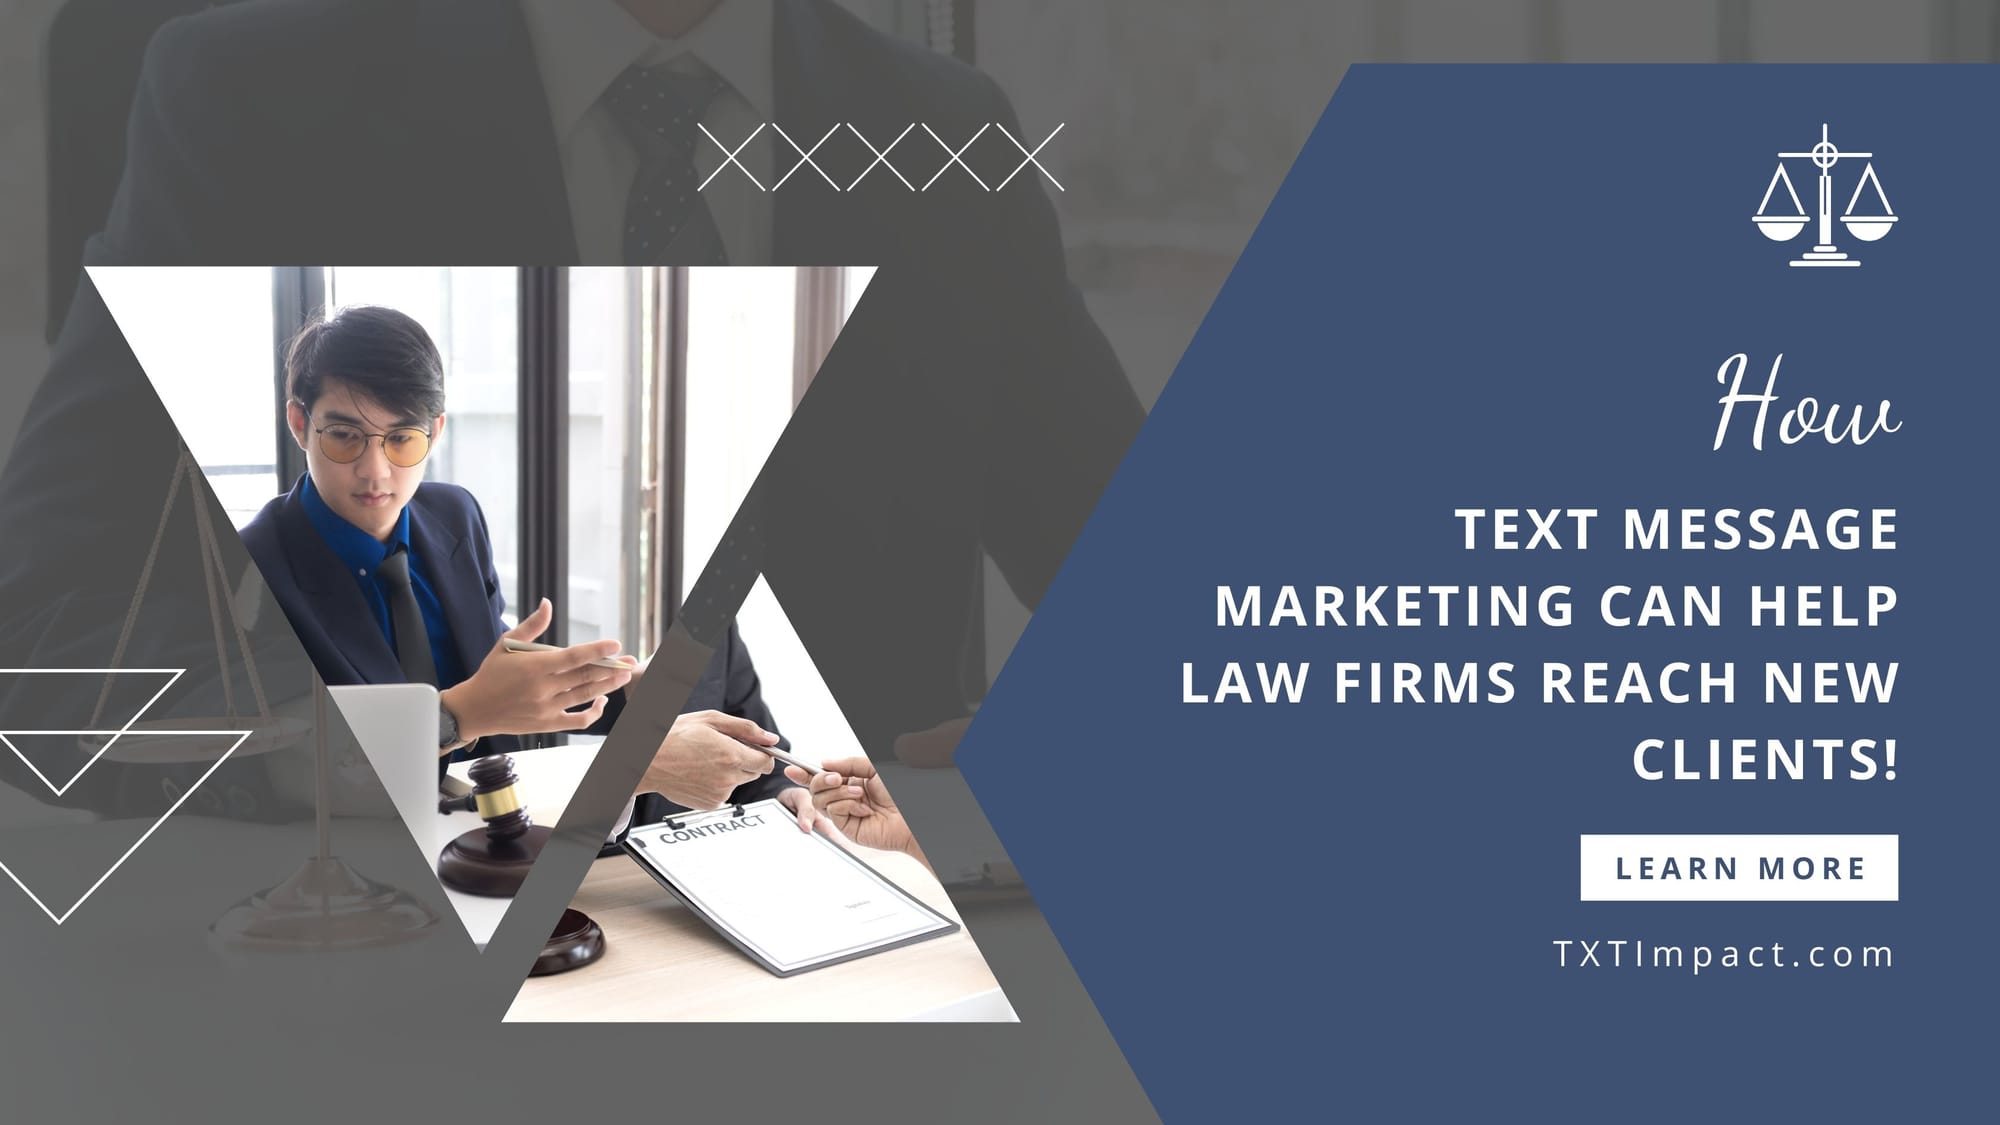 Text Message Marketing Can Help Law Firms .jpg